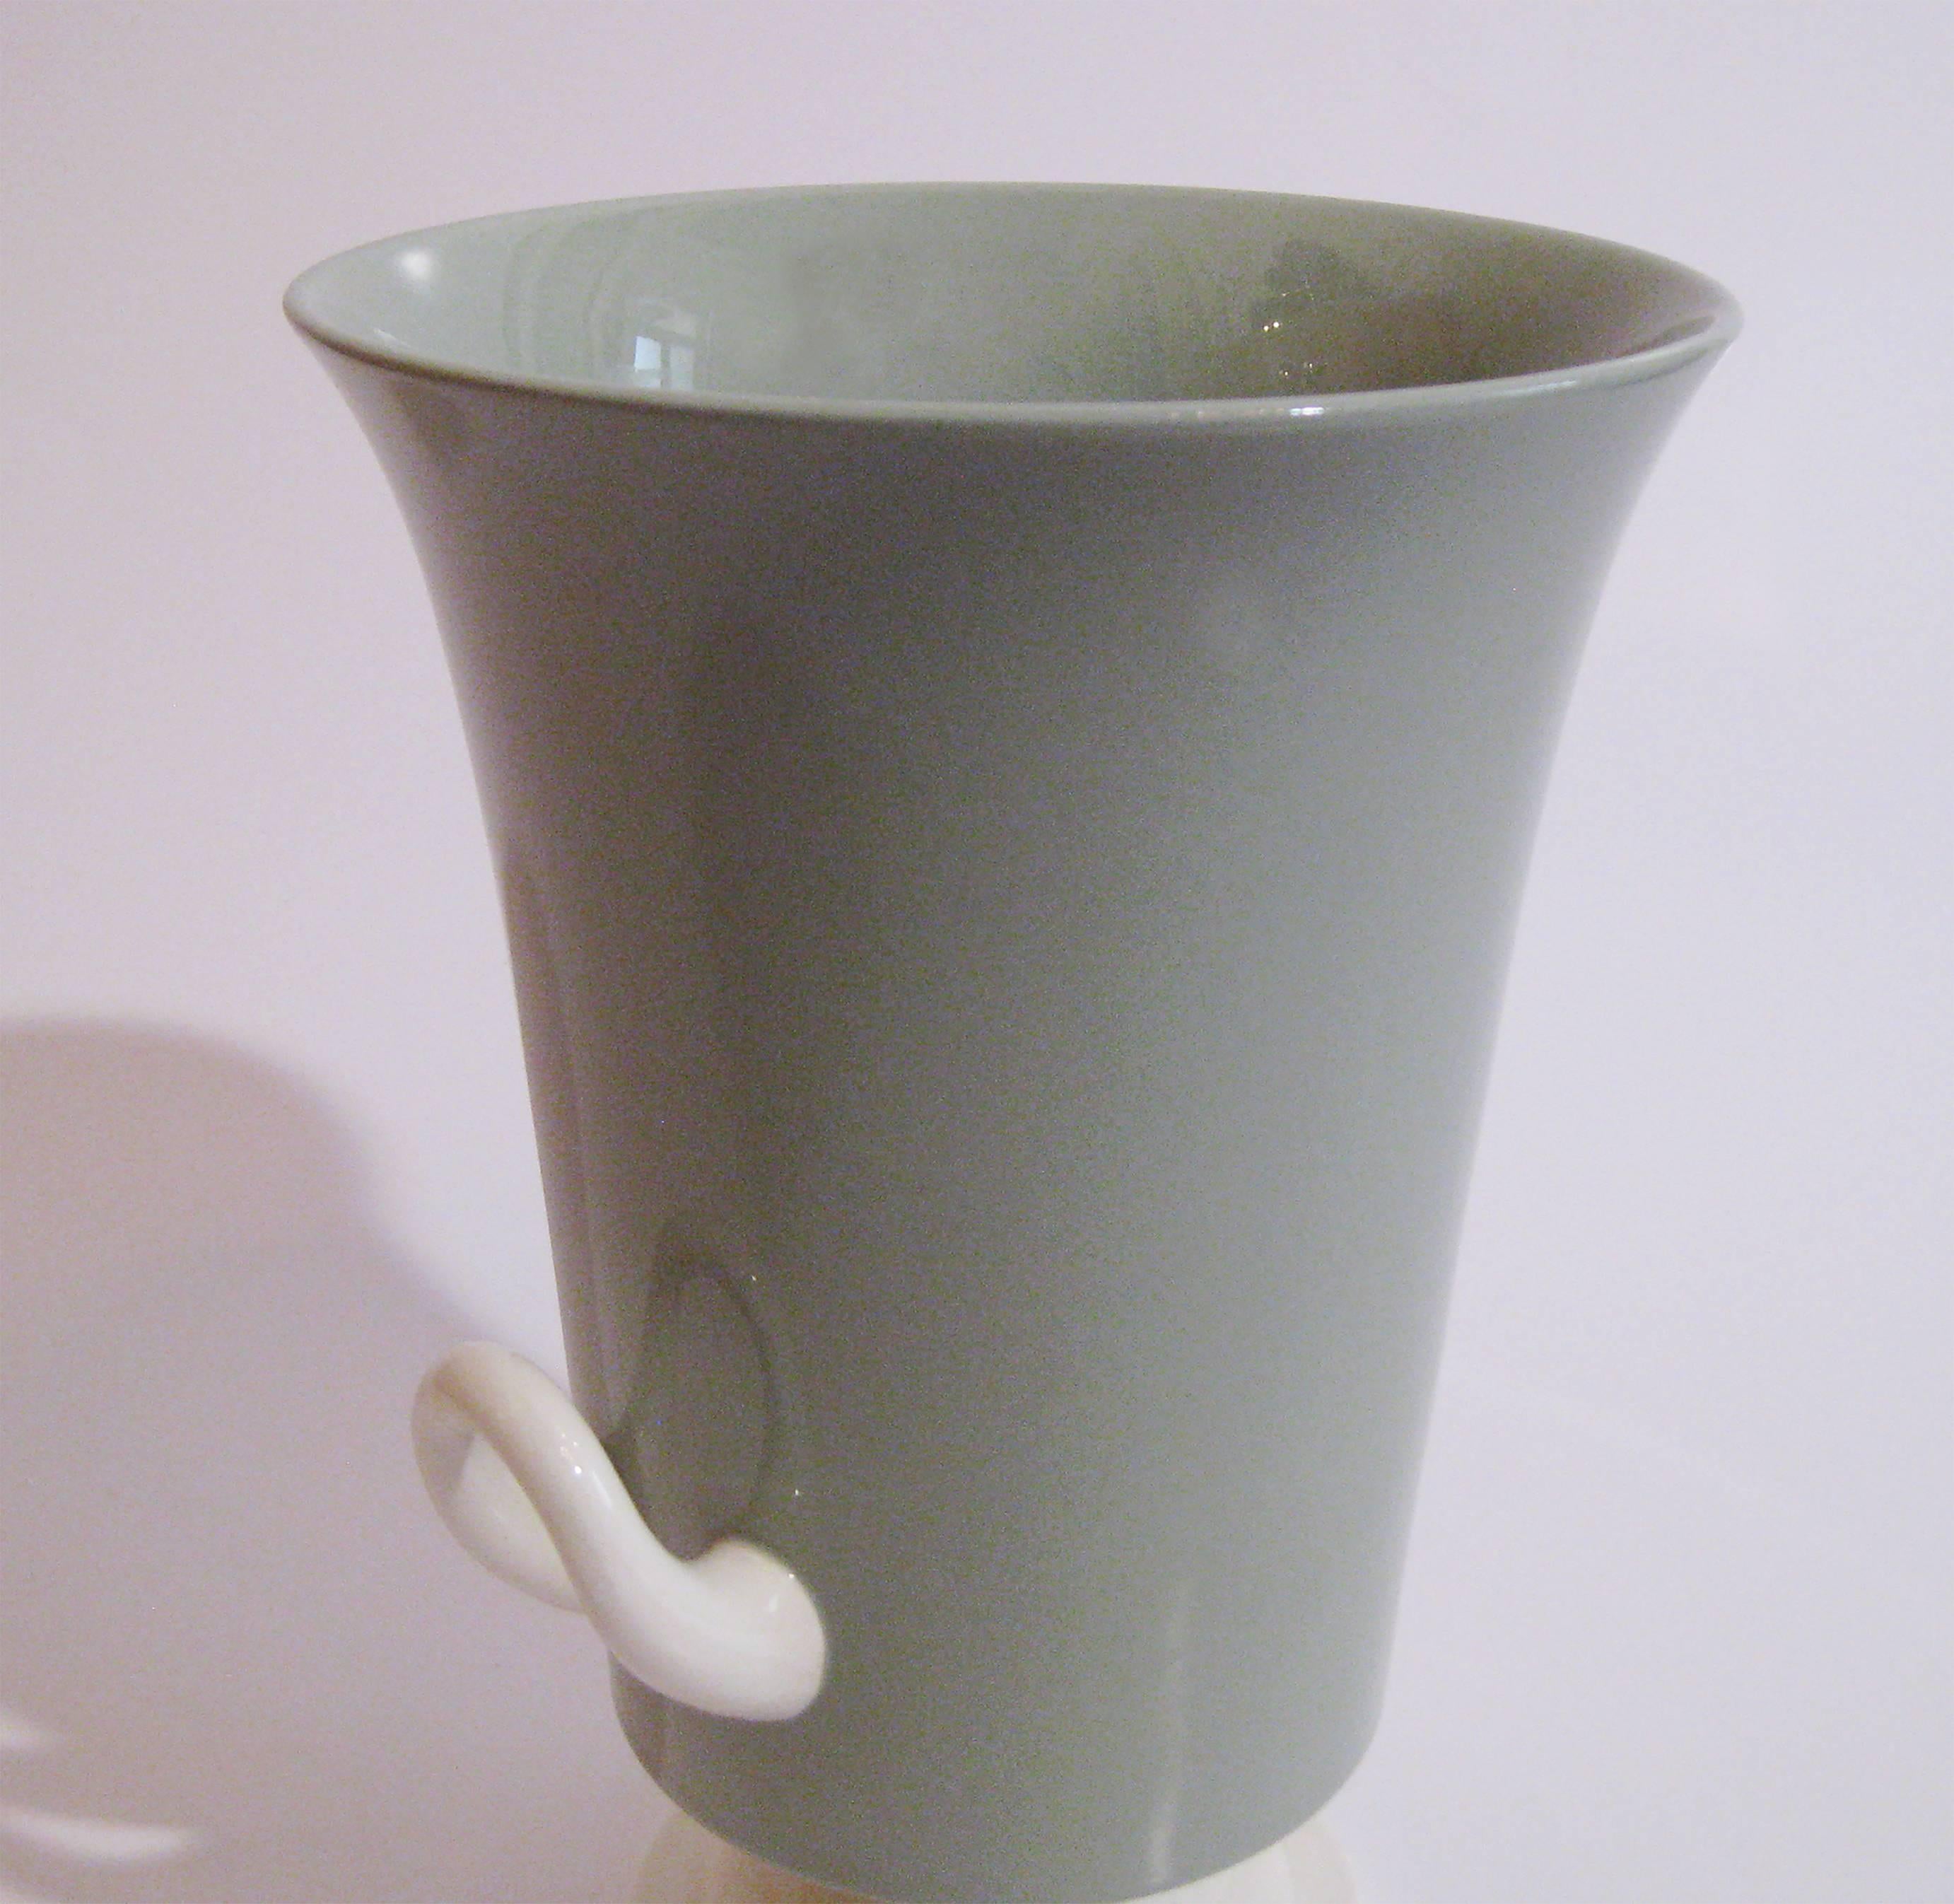 Glazed Two-Tone Vase Designed by Keith Murray, circa 1935